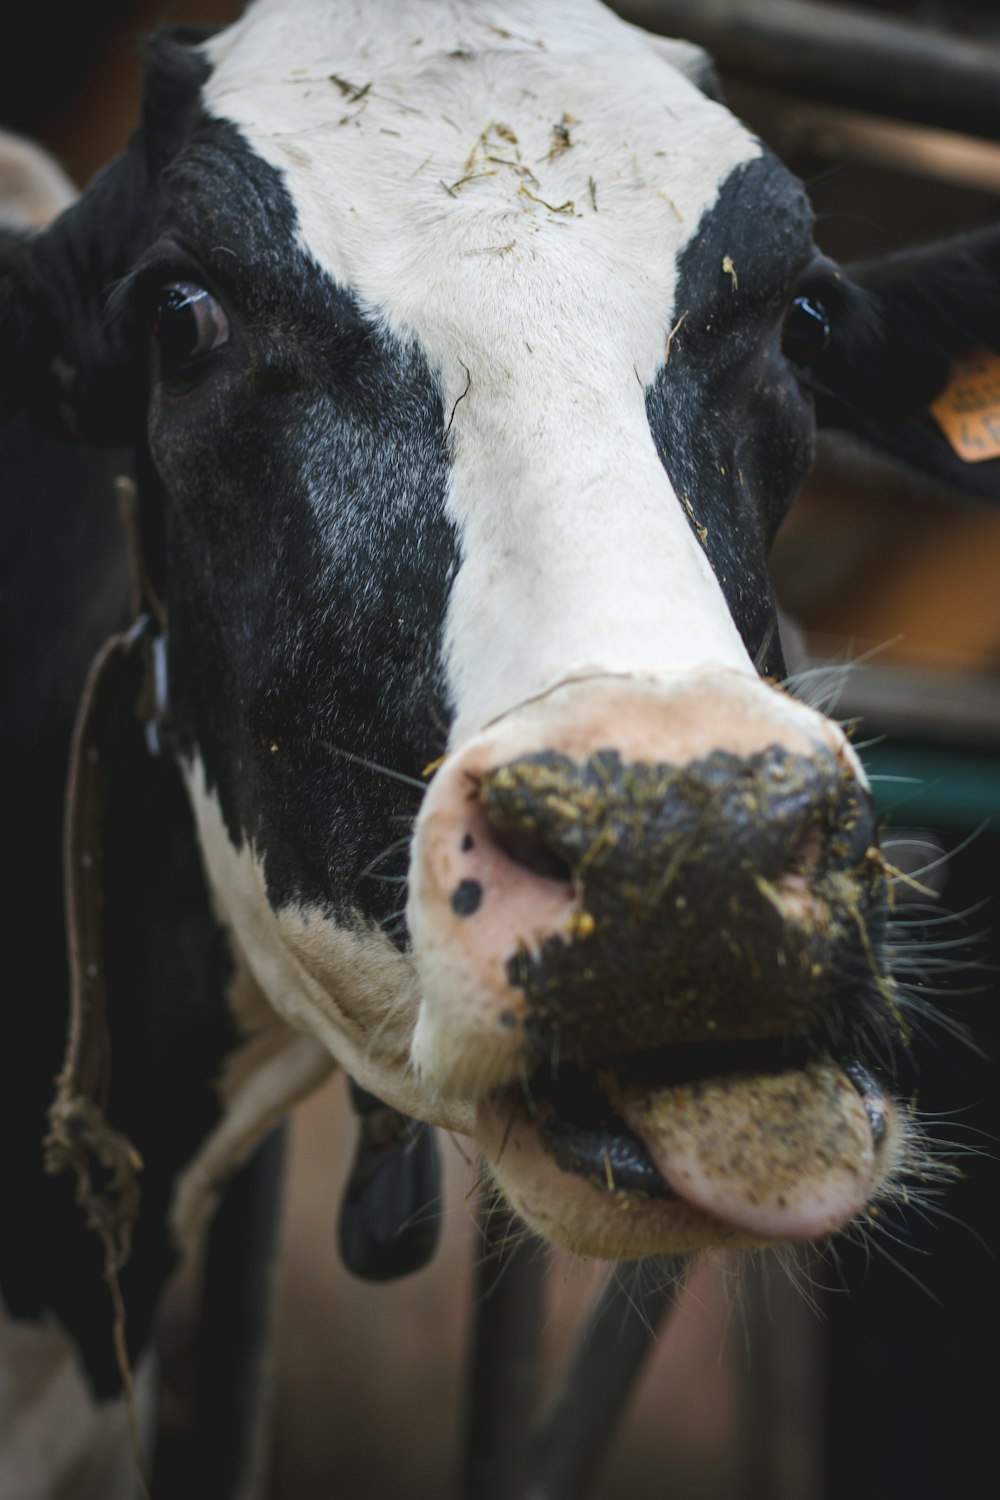 a close up of a cow's face and nose